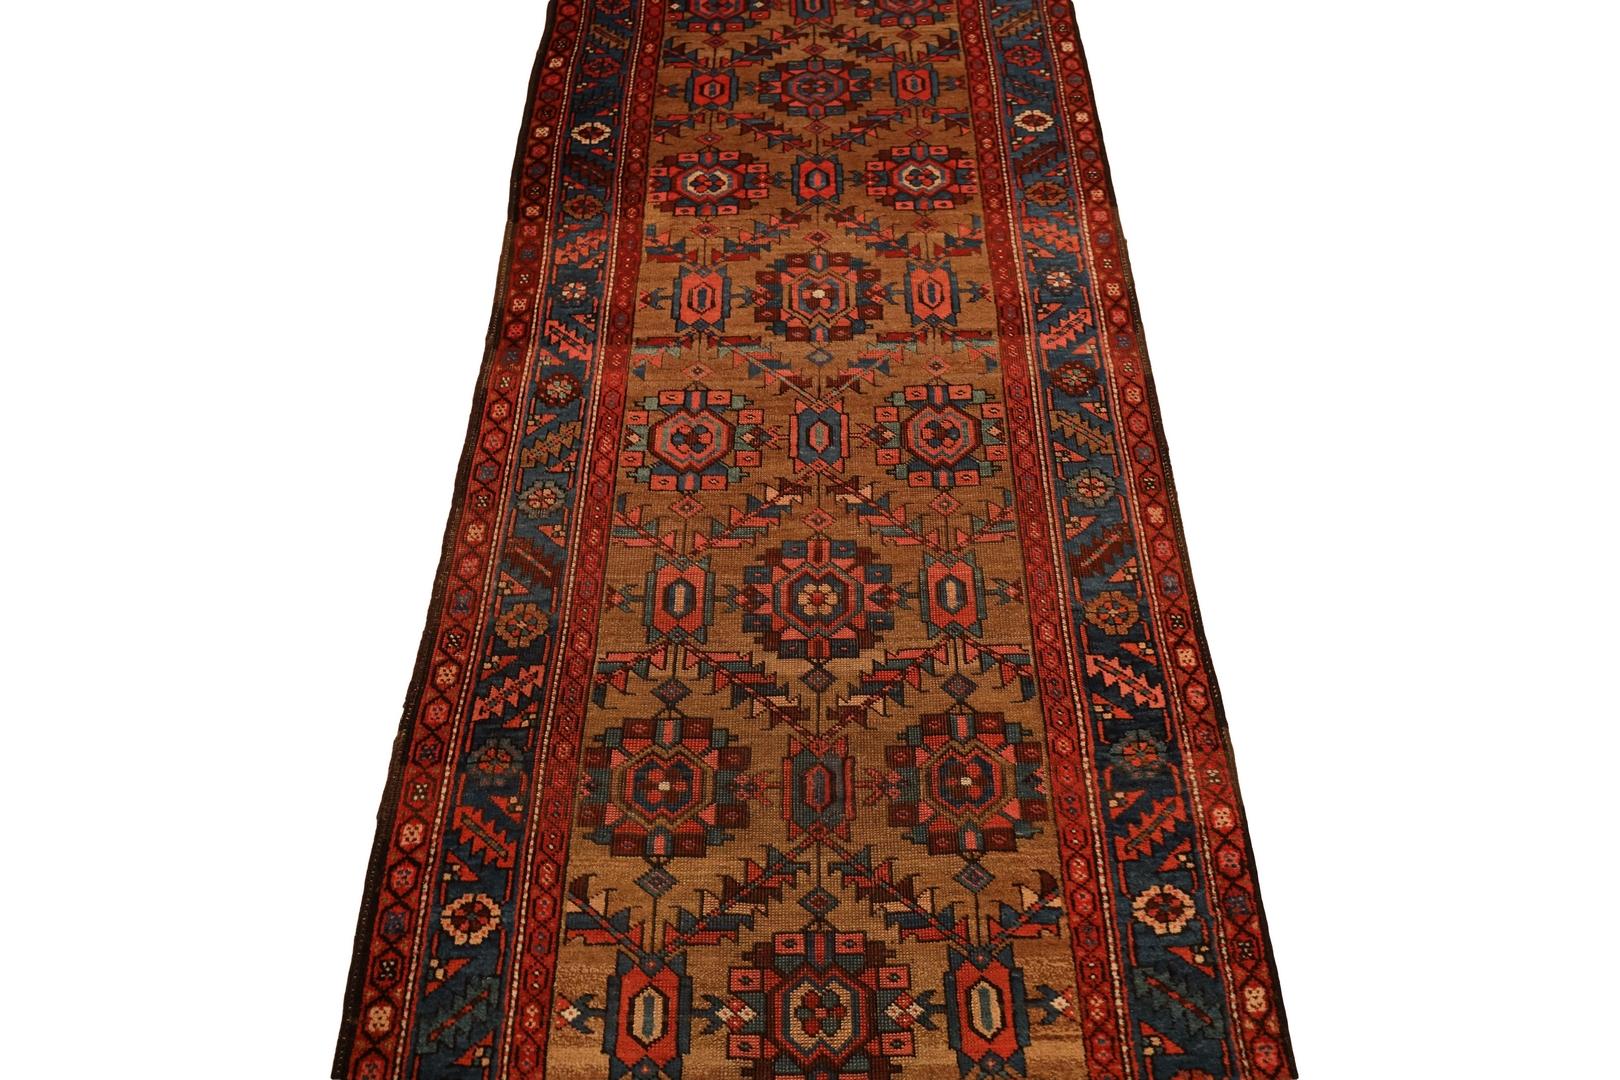 20th Century North-West Persian Vintage Runner - 3'1